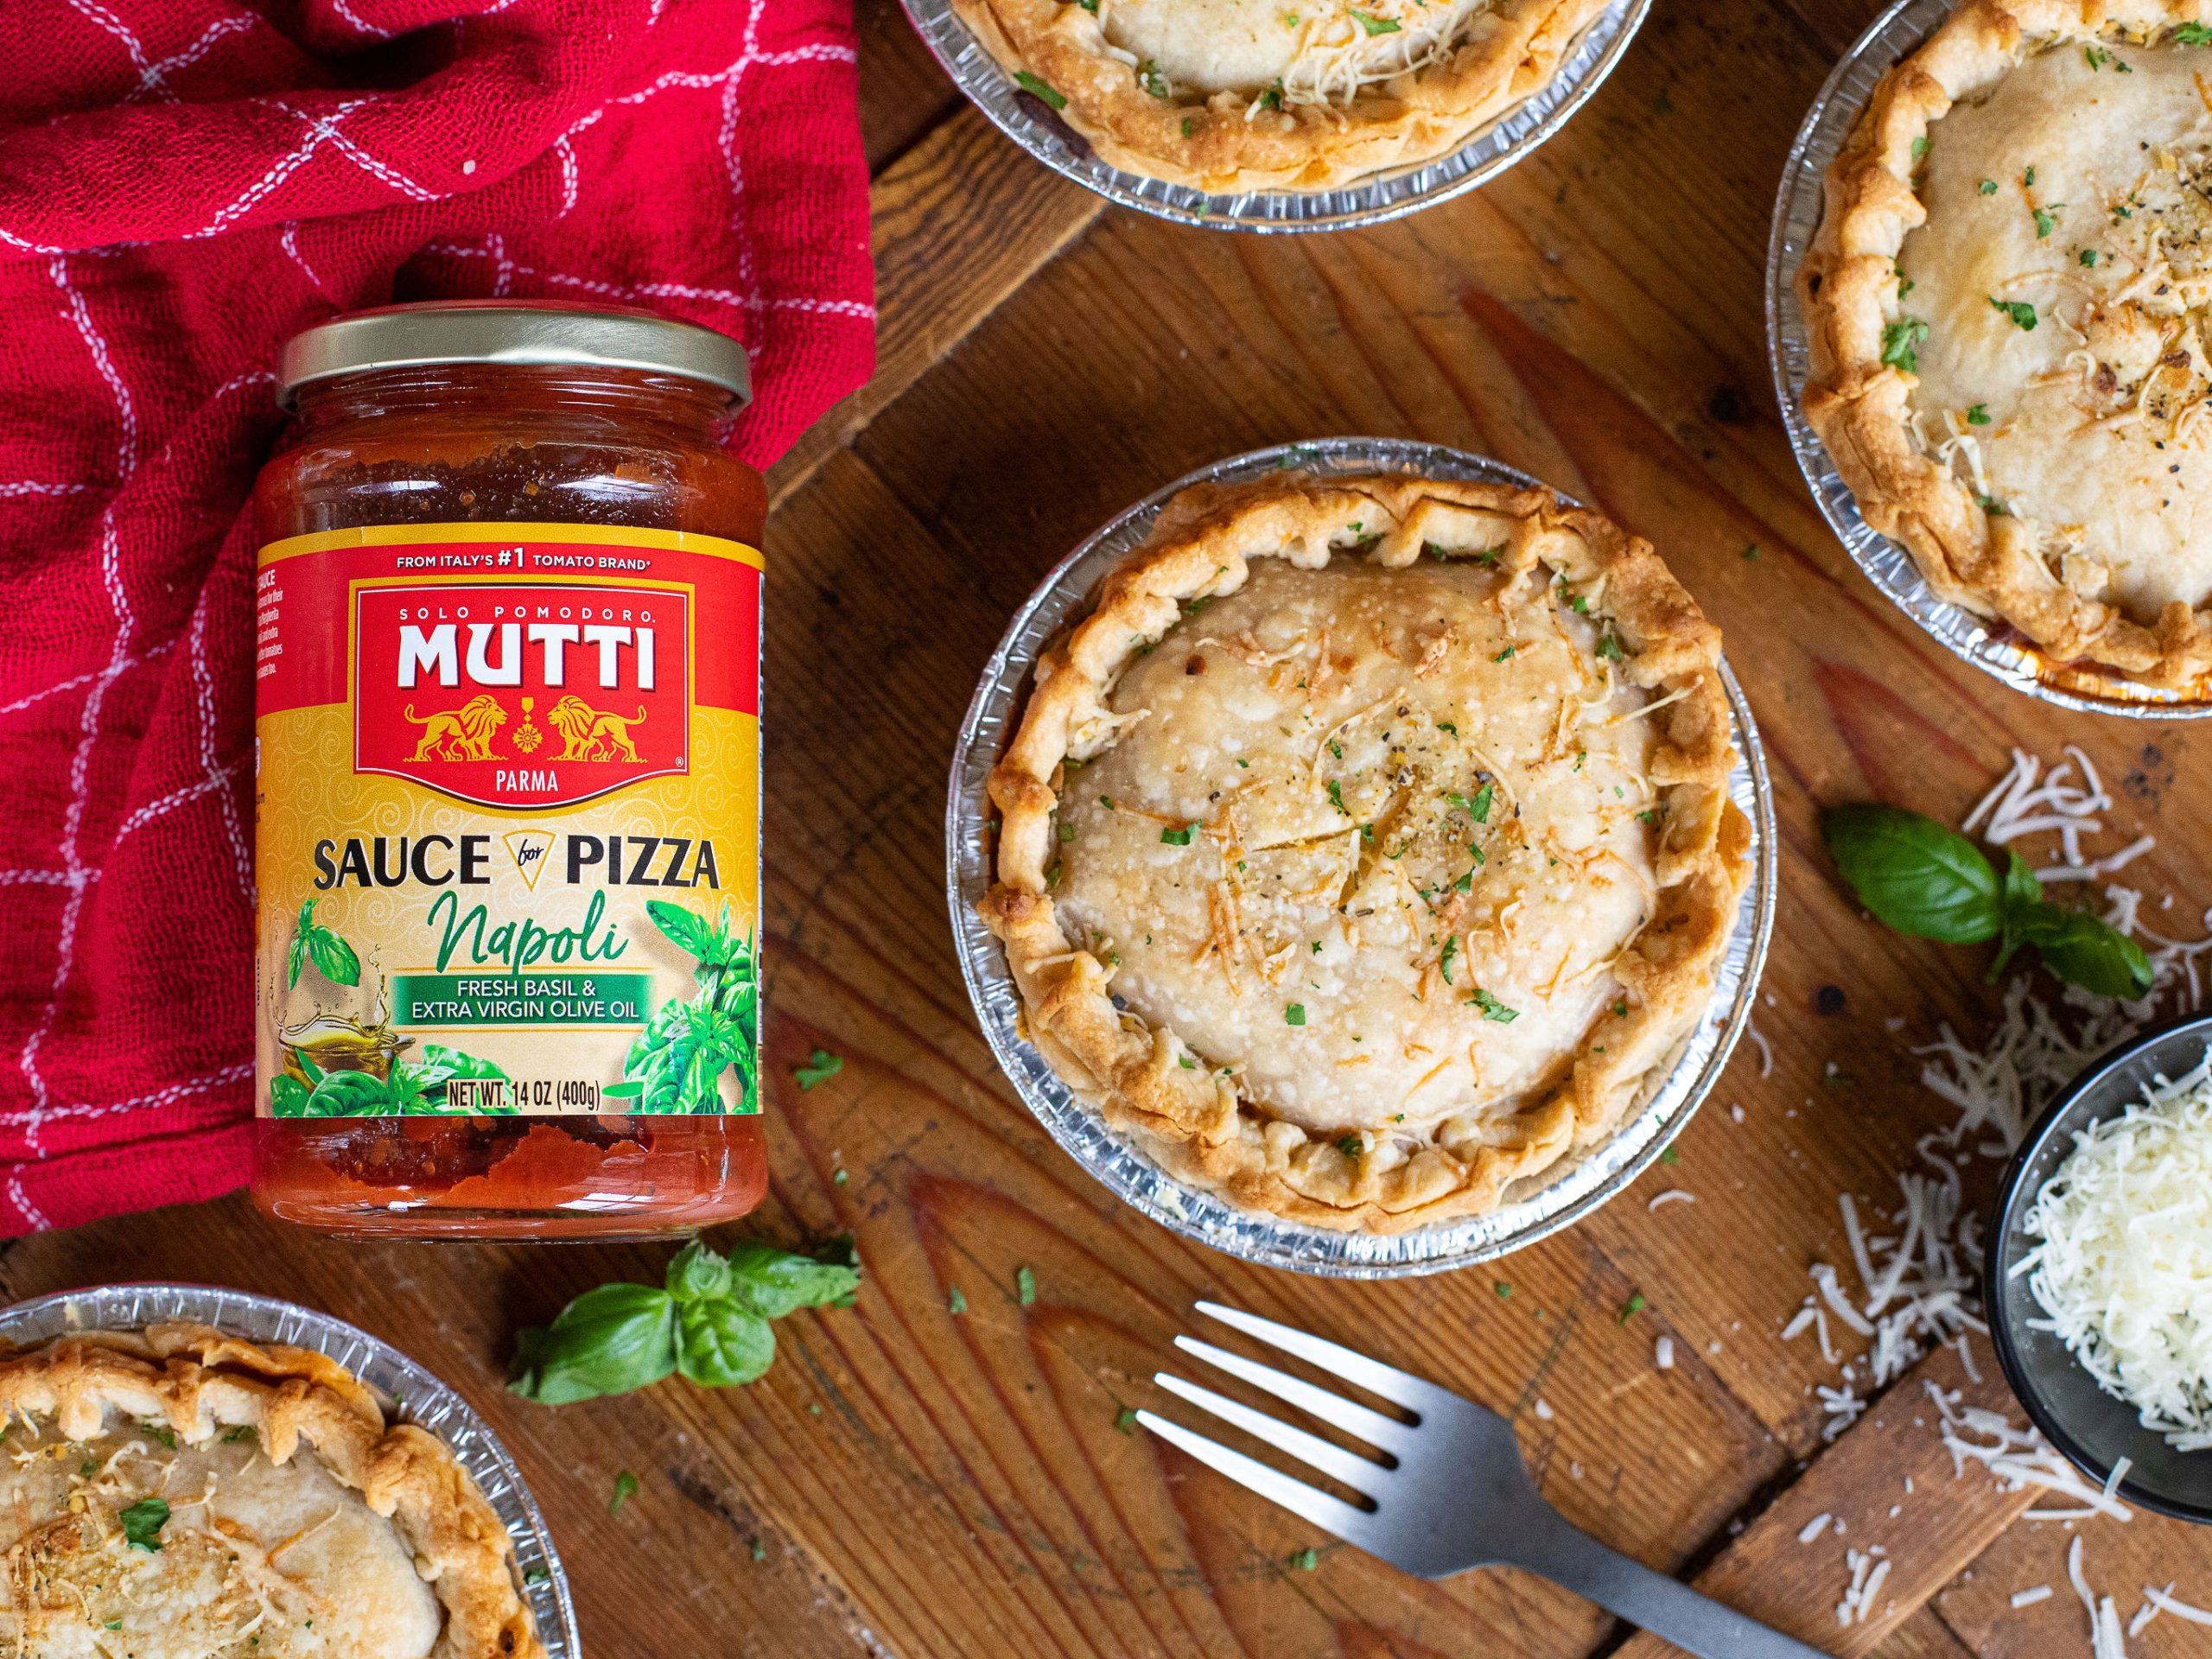 Loaded Pizza Pot Pies Are The Perfect Recipe To Go With The Mutti Sauce For Pizza Coupon! on I Heart Publix 1